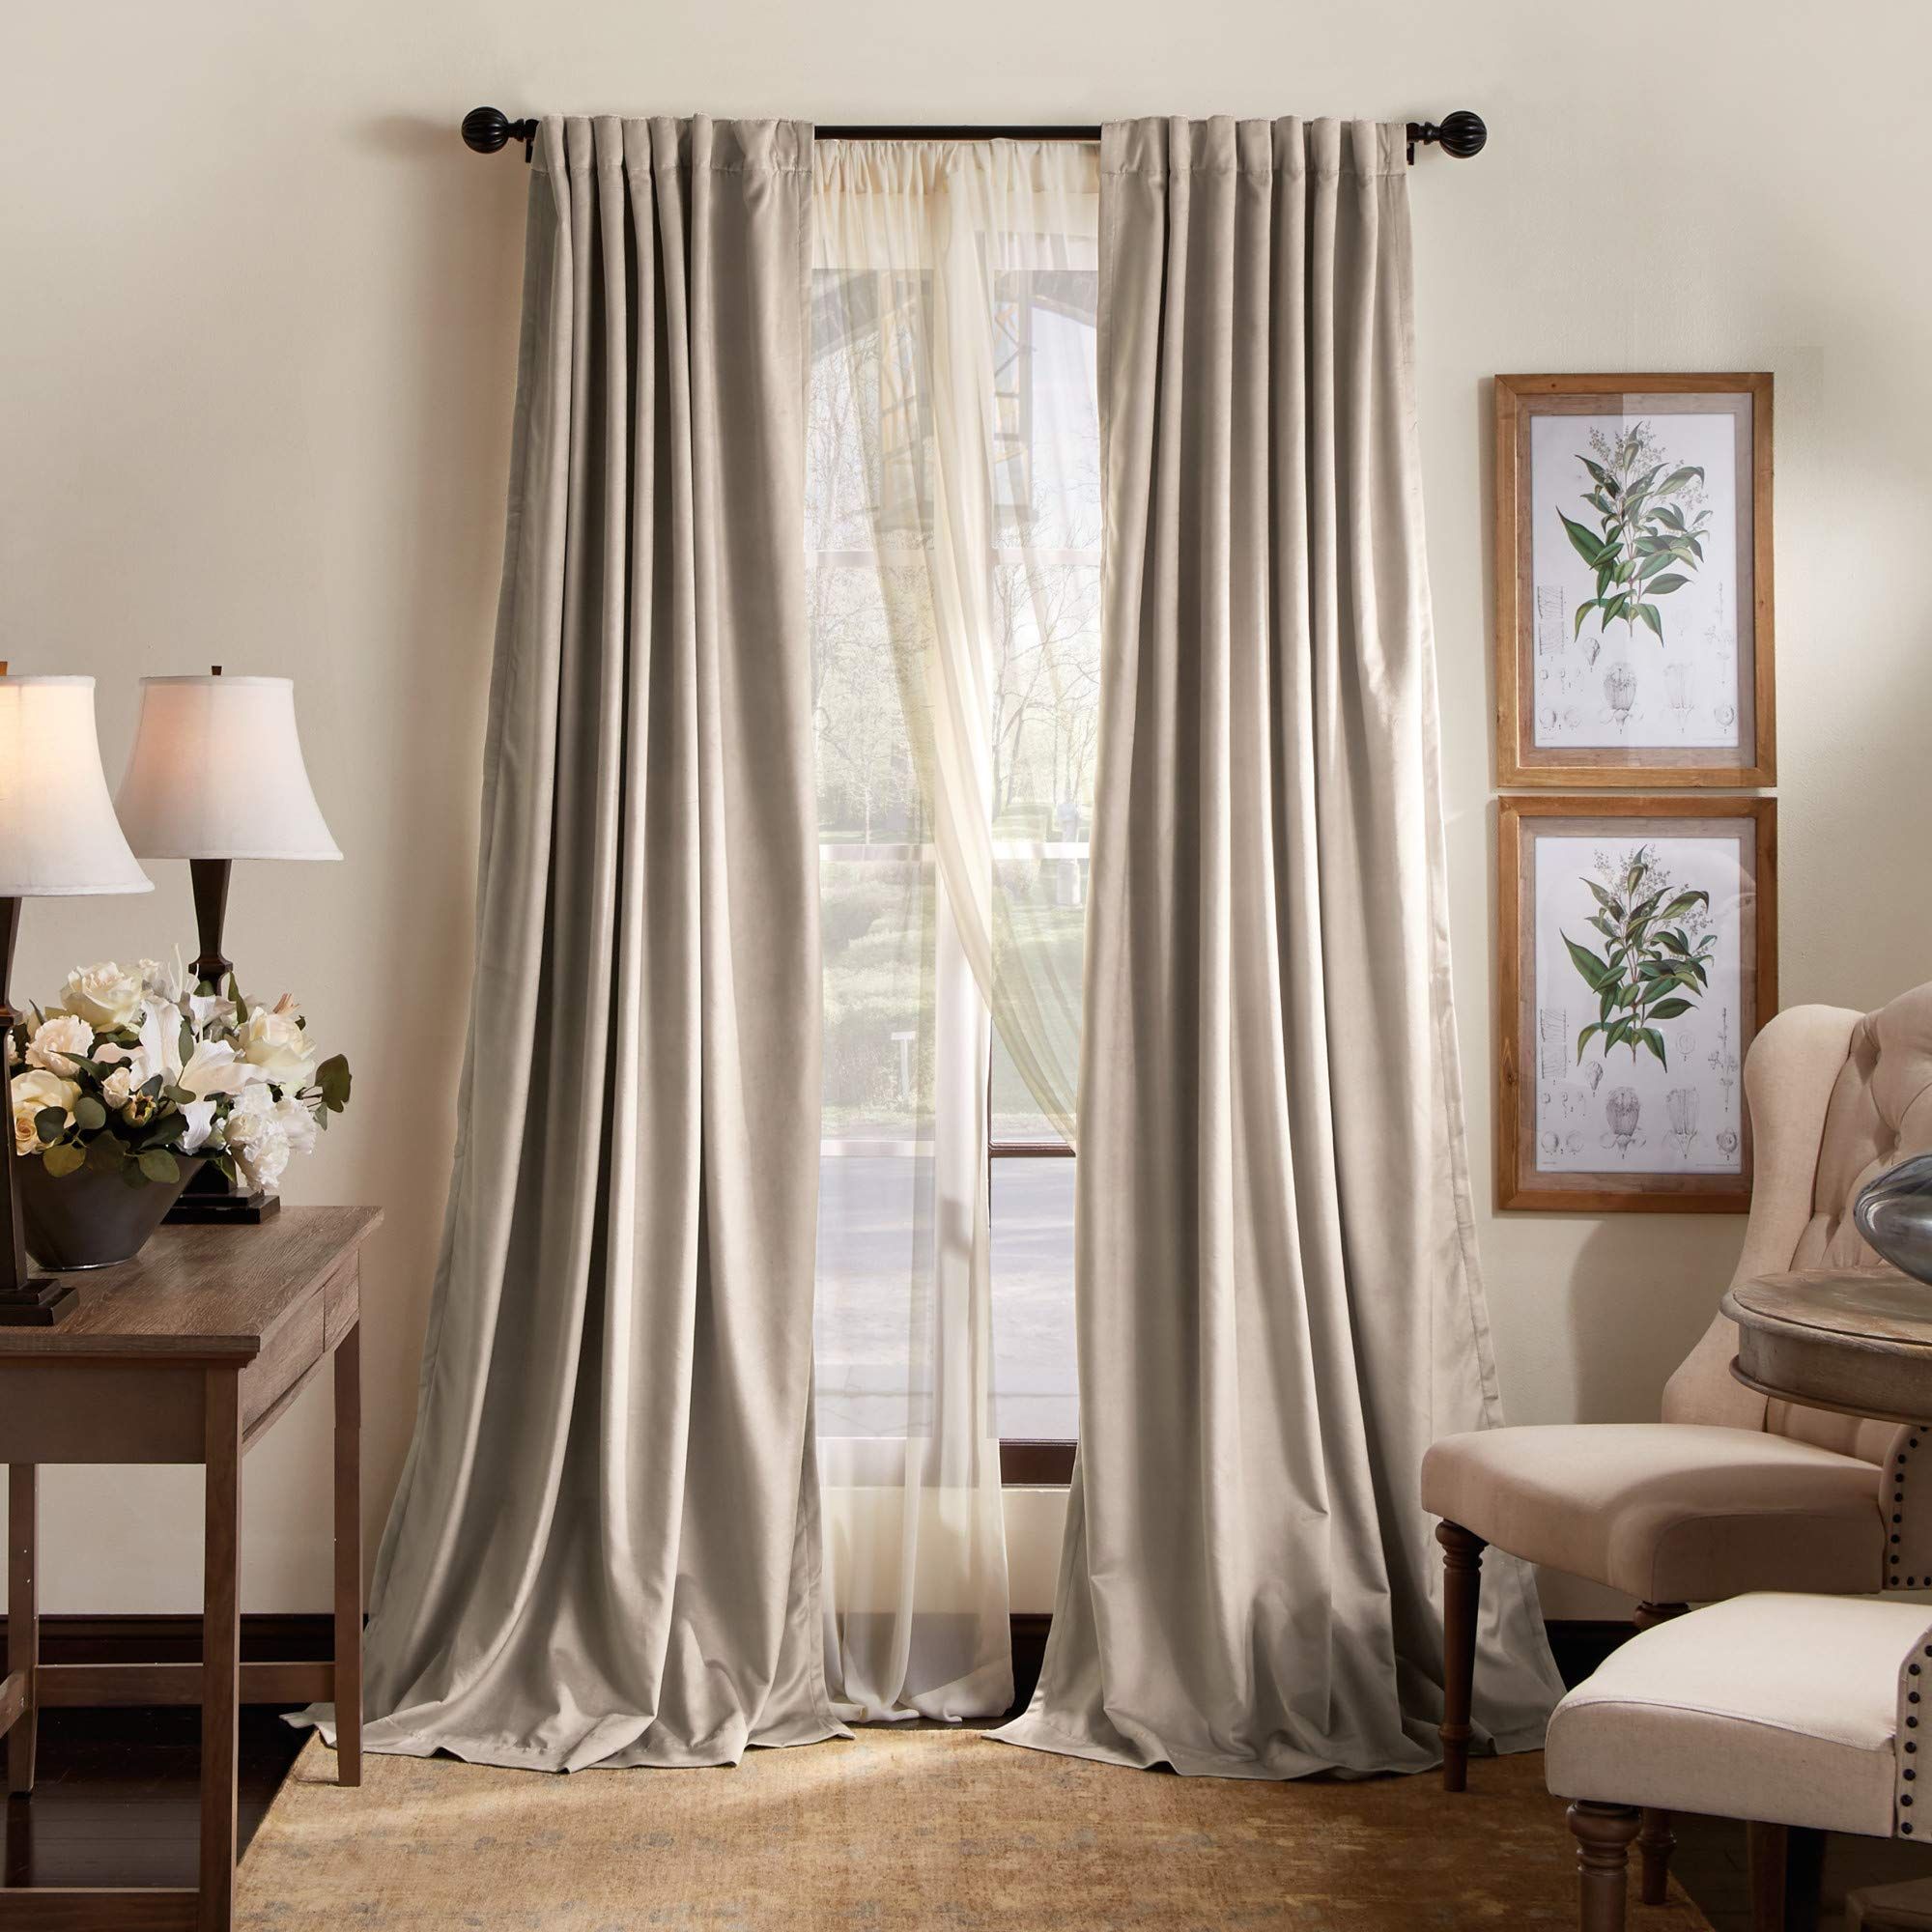 Blackout Curtains: Enhance Privacy and Sleep Quality in Style